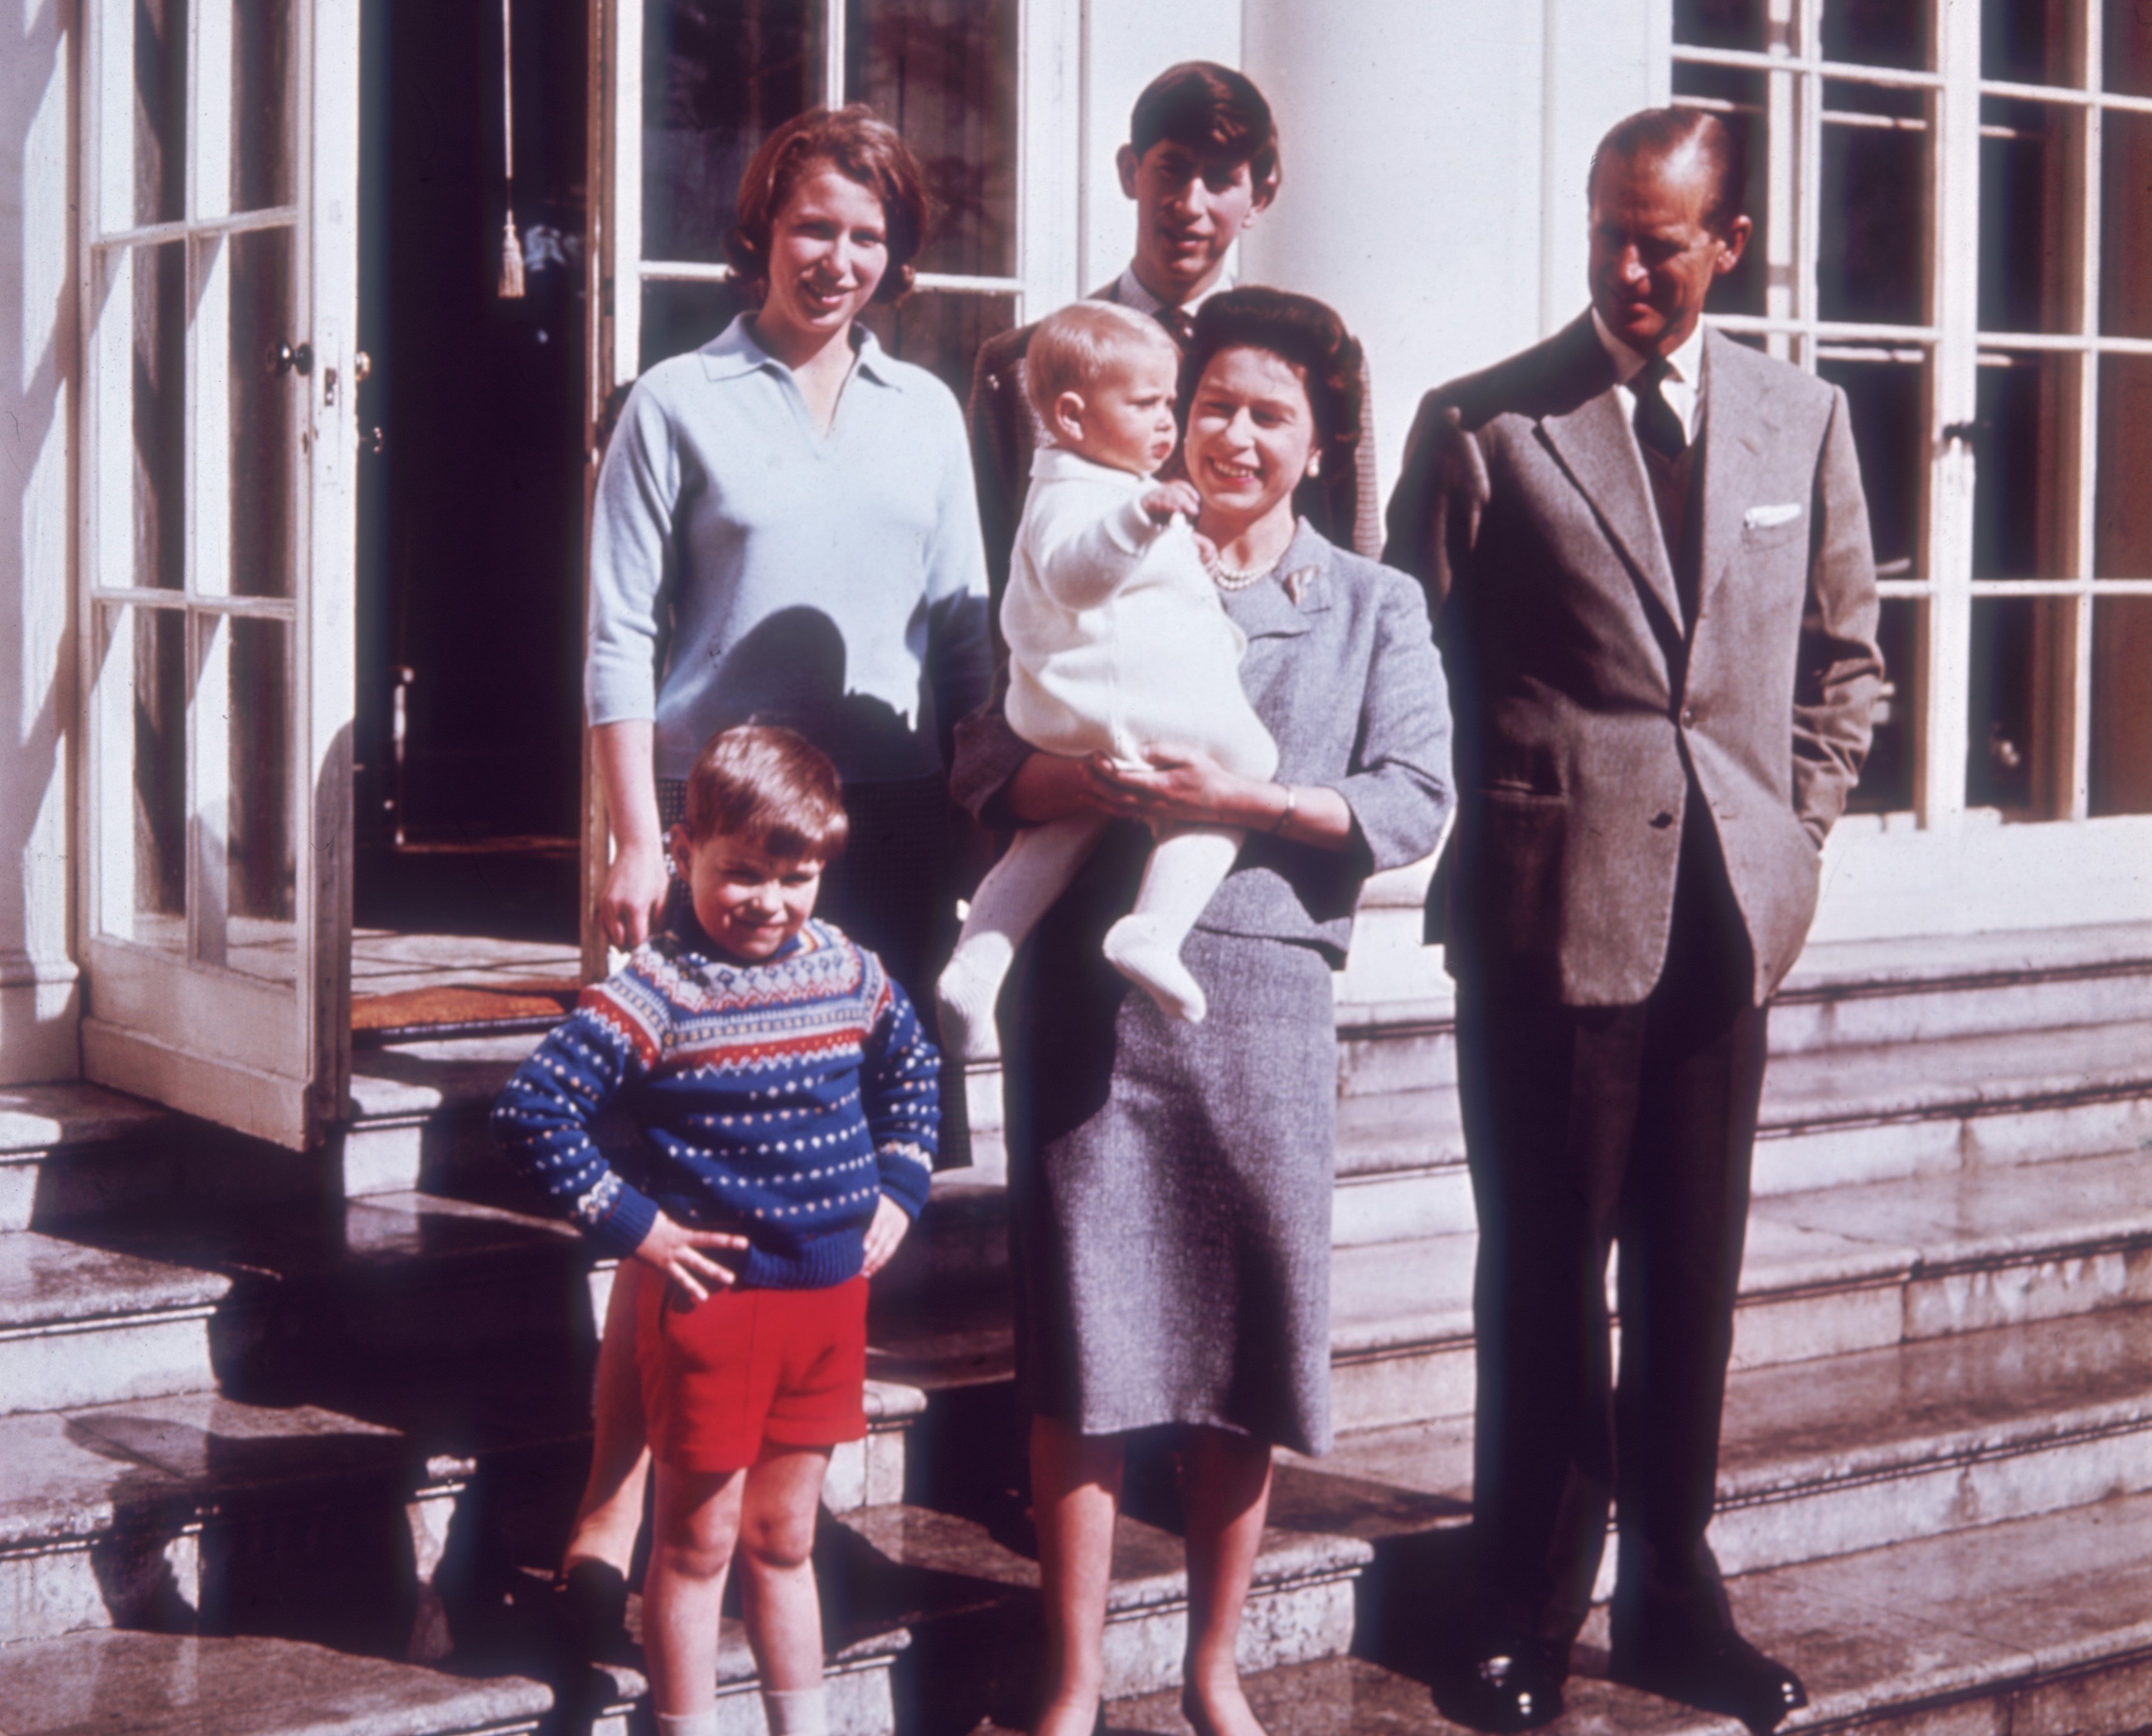 Why 1 of Queen Elizabeth and Prince Philip’s Children Was Not Born in Buckingham Palace